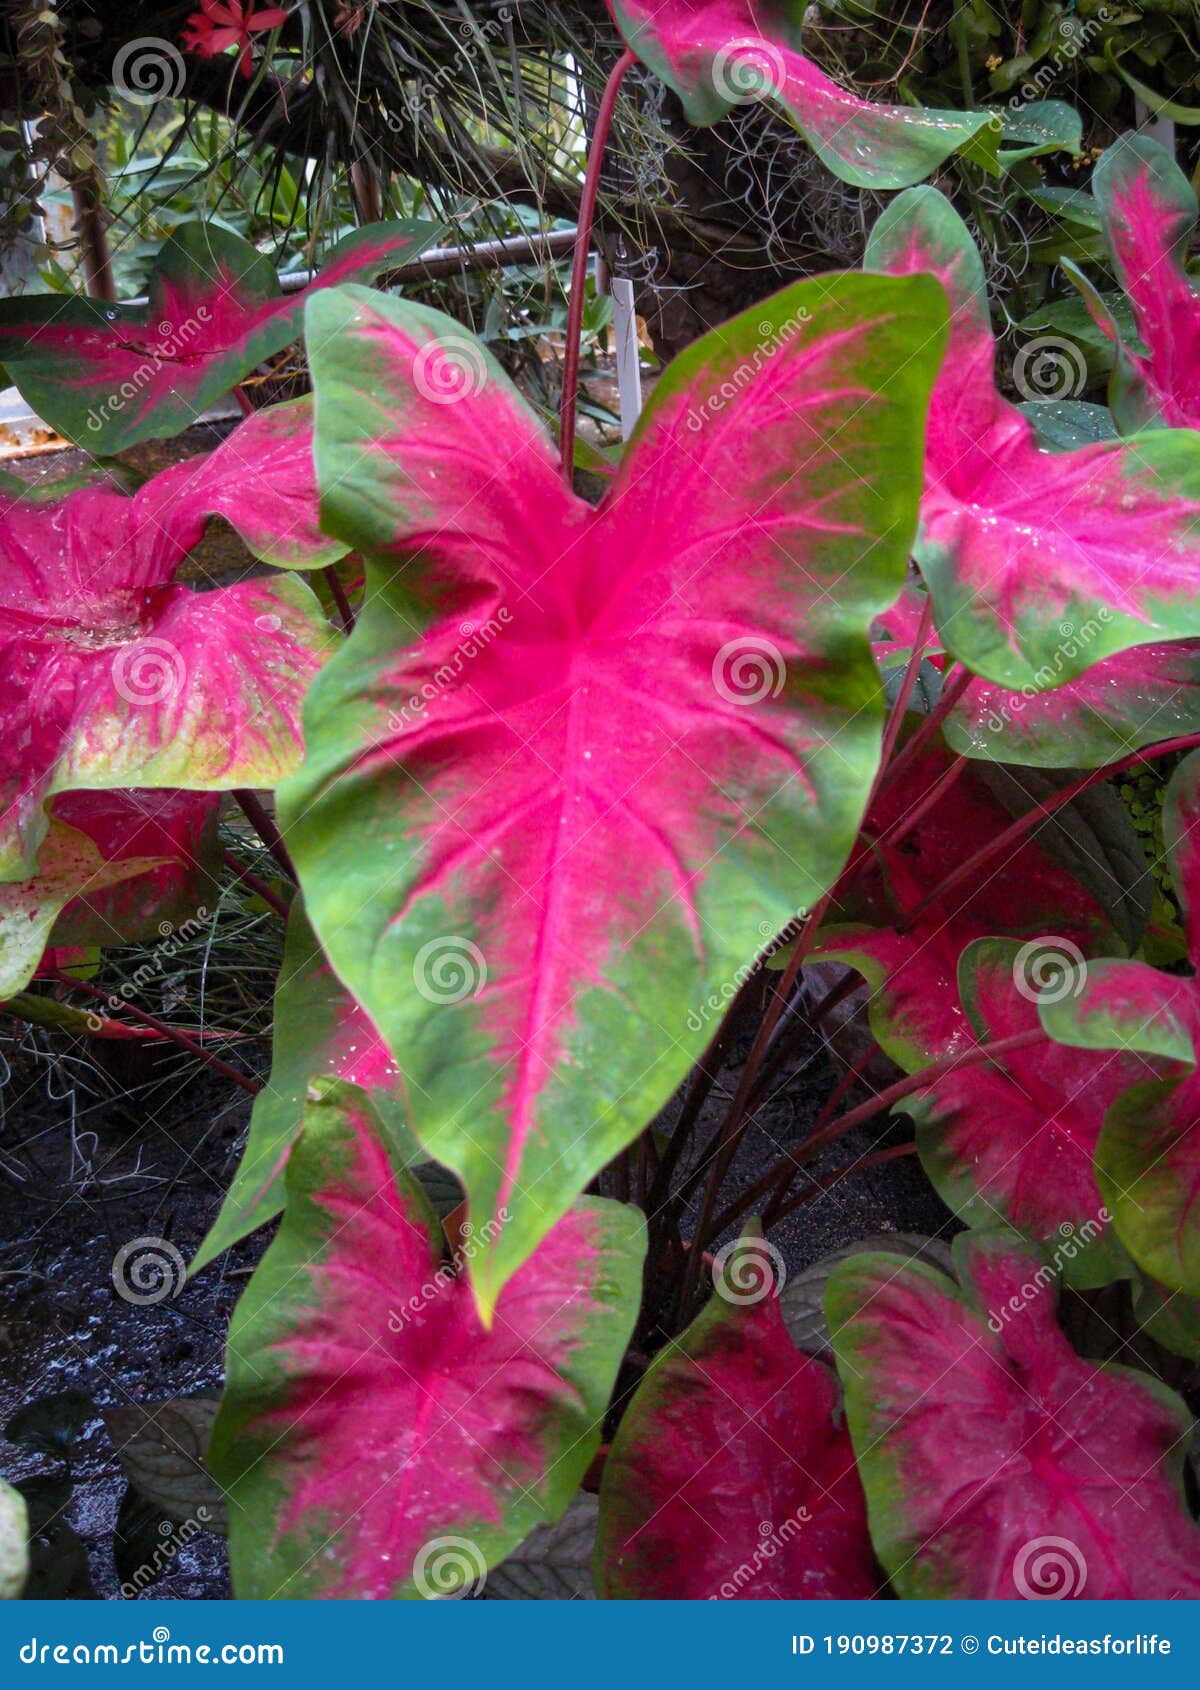 beautiful plant leaf caladium bicolor, called heart of jesus, with is pink and green color